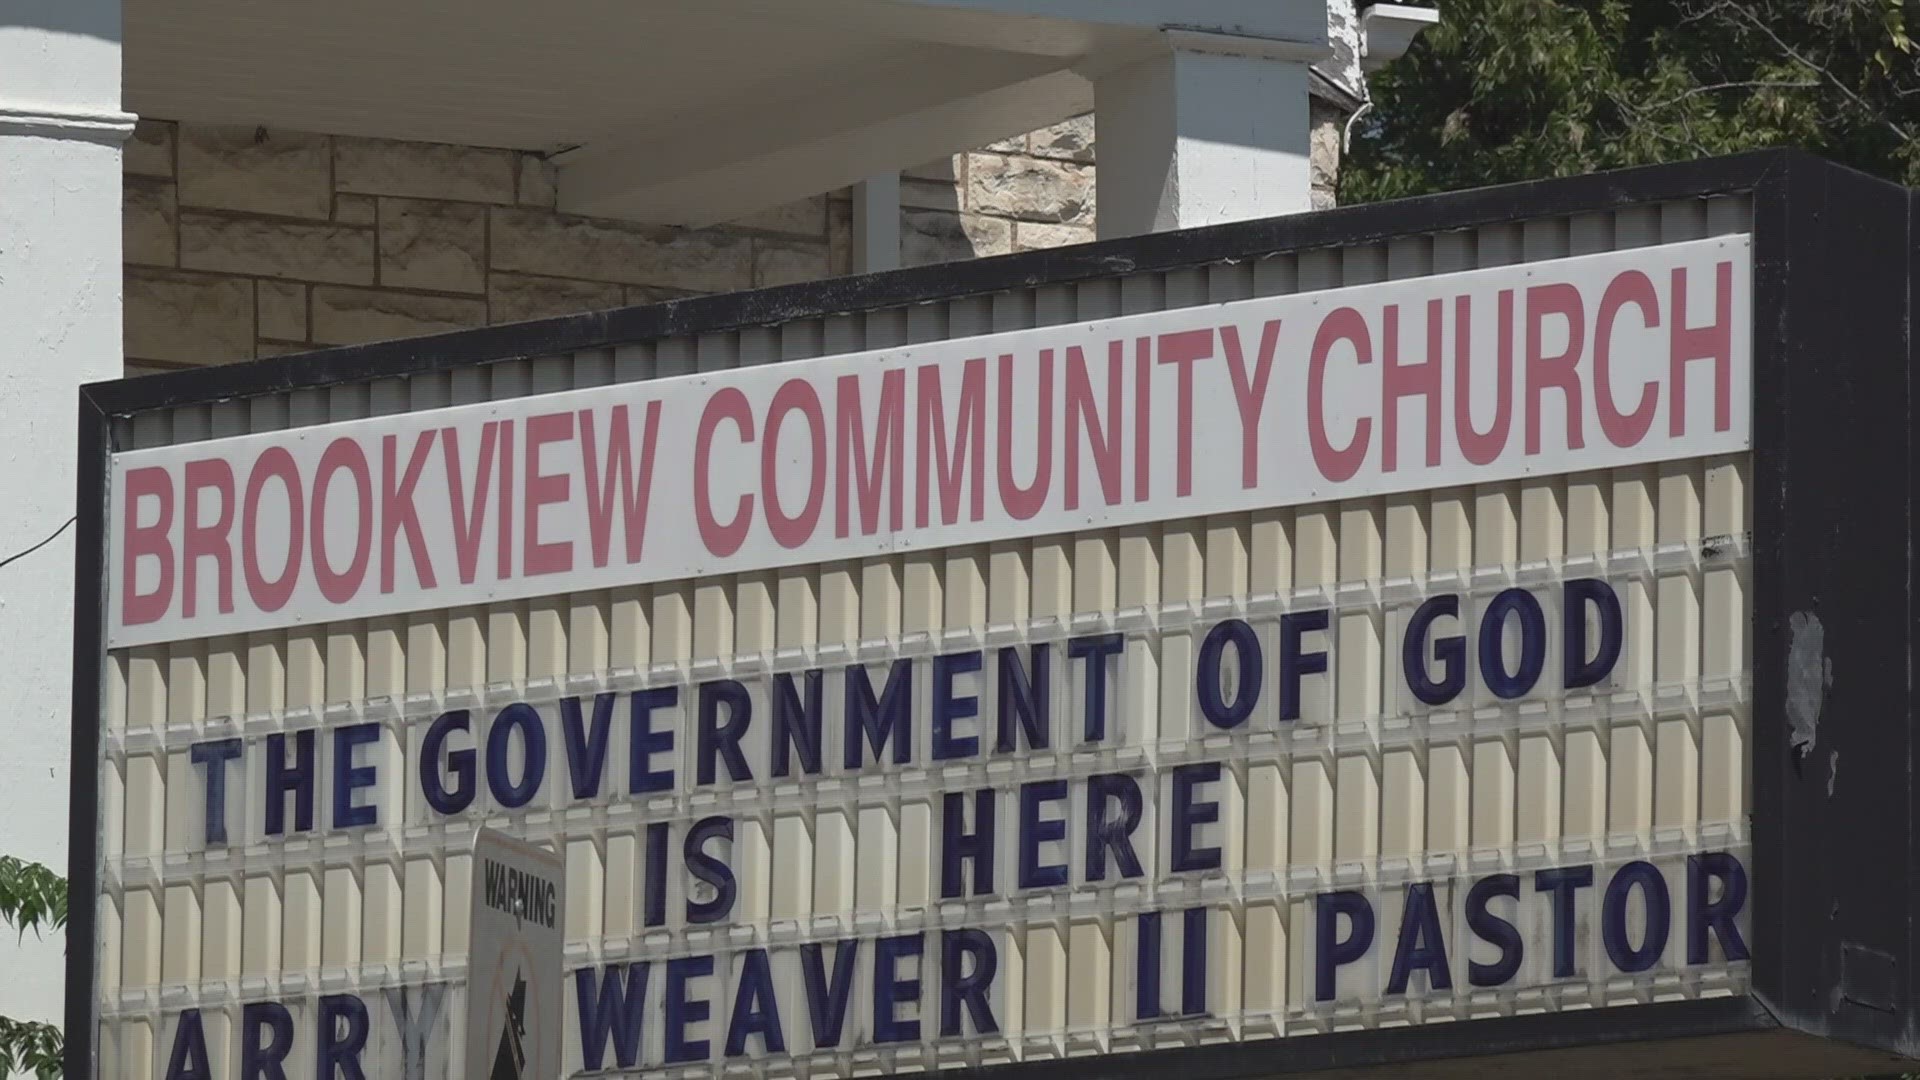 Pastor Larrye Weaver Jr. has organized a GoFundMe for Brookview Community Church after two A/C units were allegedly stolen from the property on July 14.